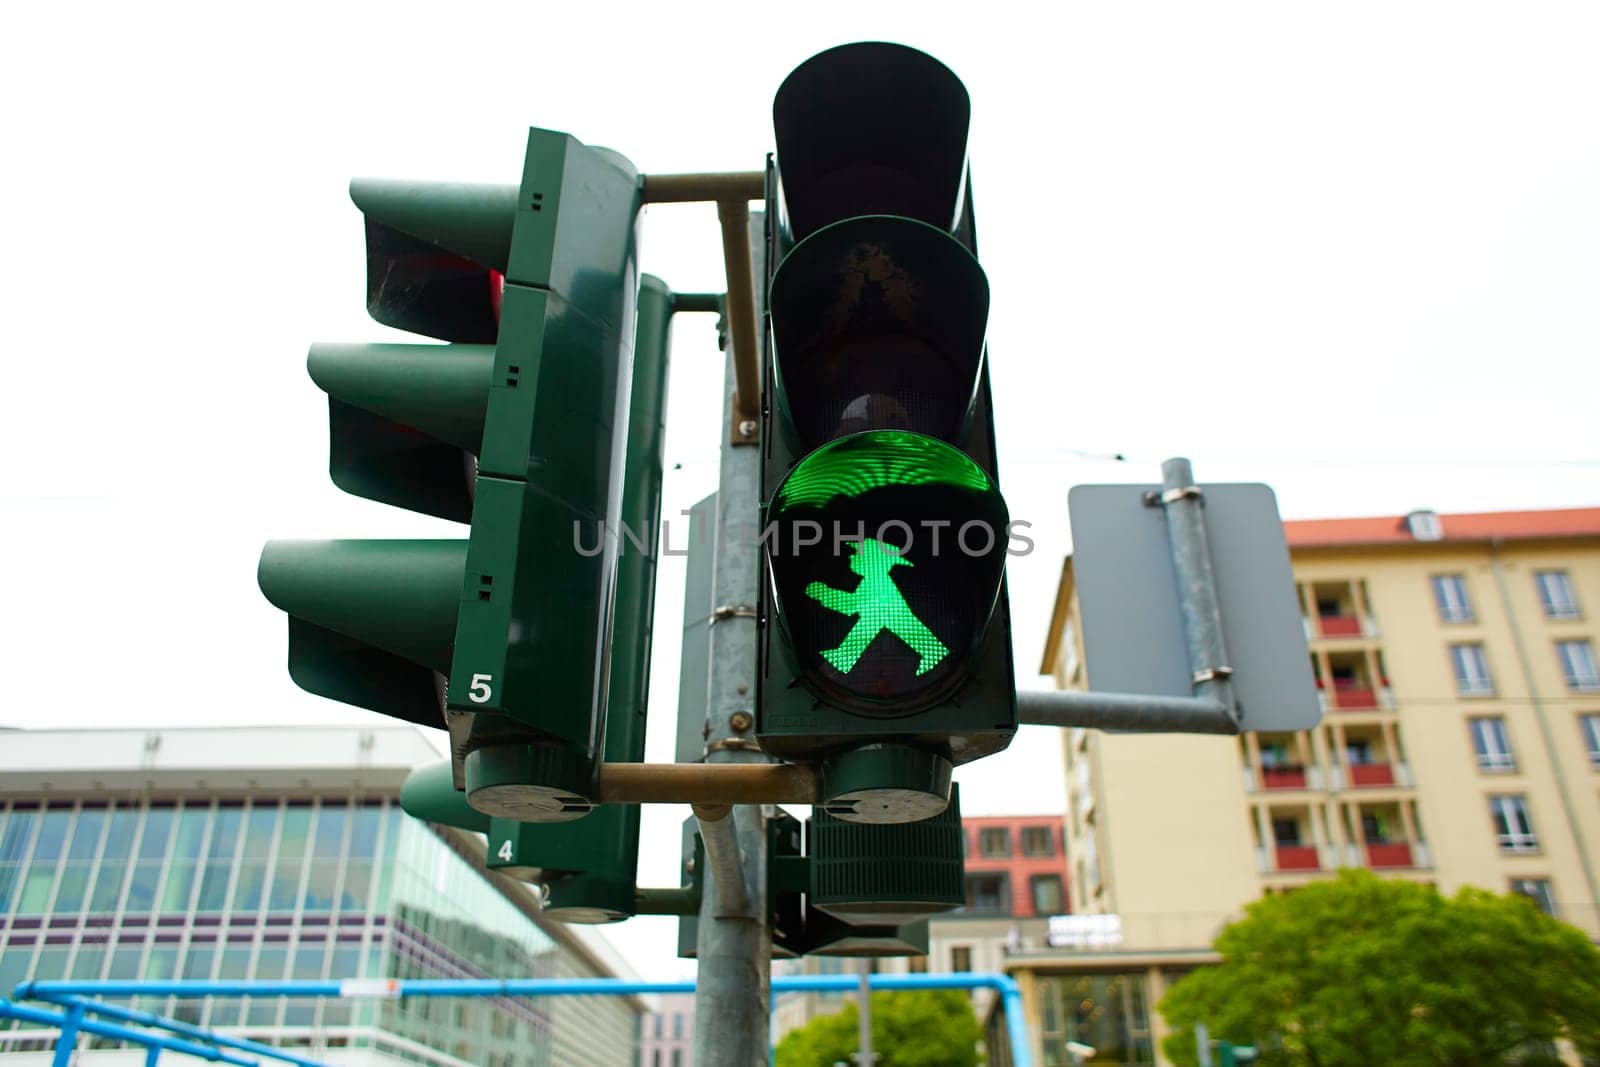 Traffic light for pedestrians with the figure of a walking man, lights green.